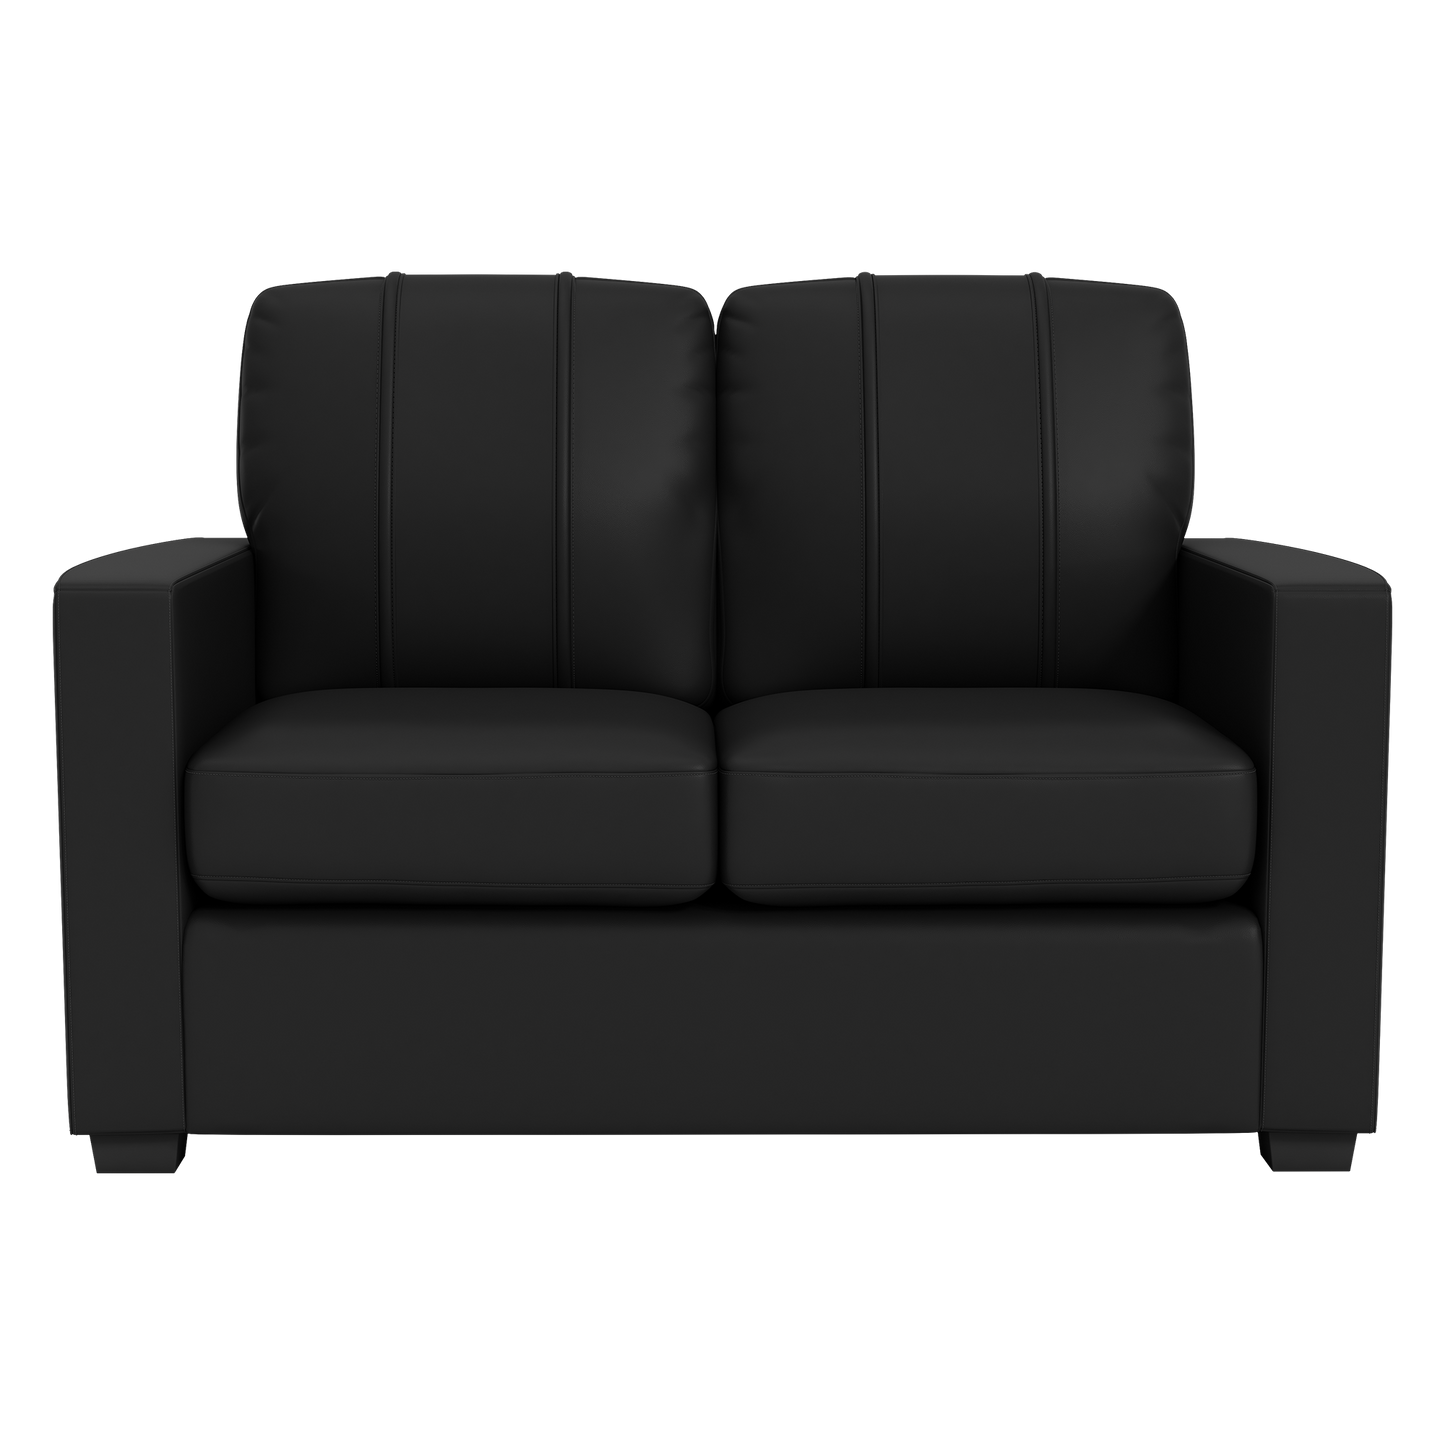 Silver Loveseat with Sports Car Gaming Logo